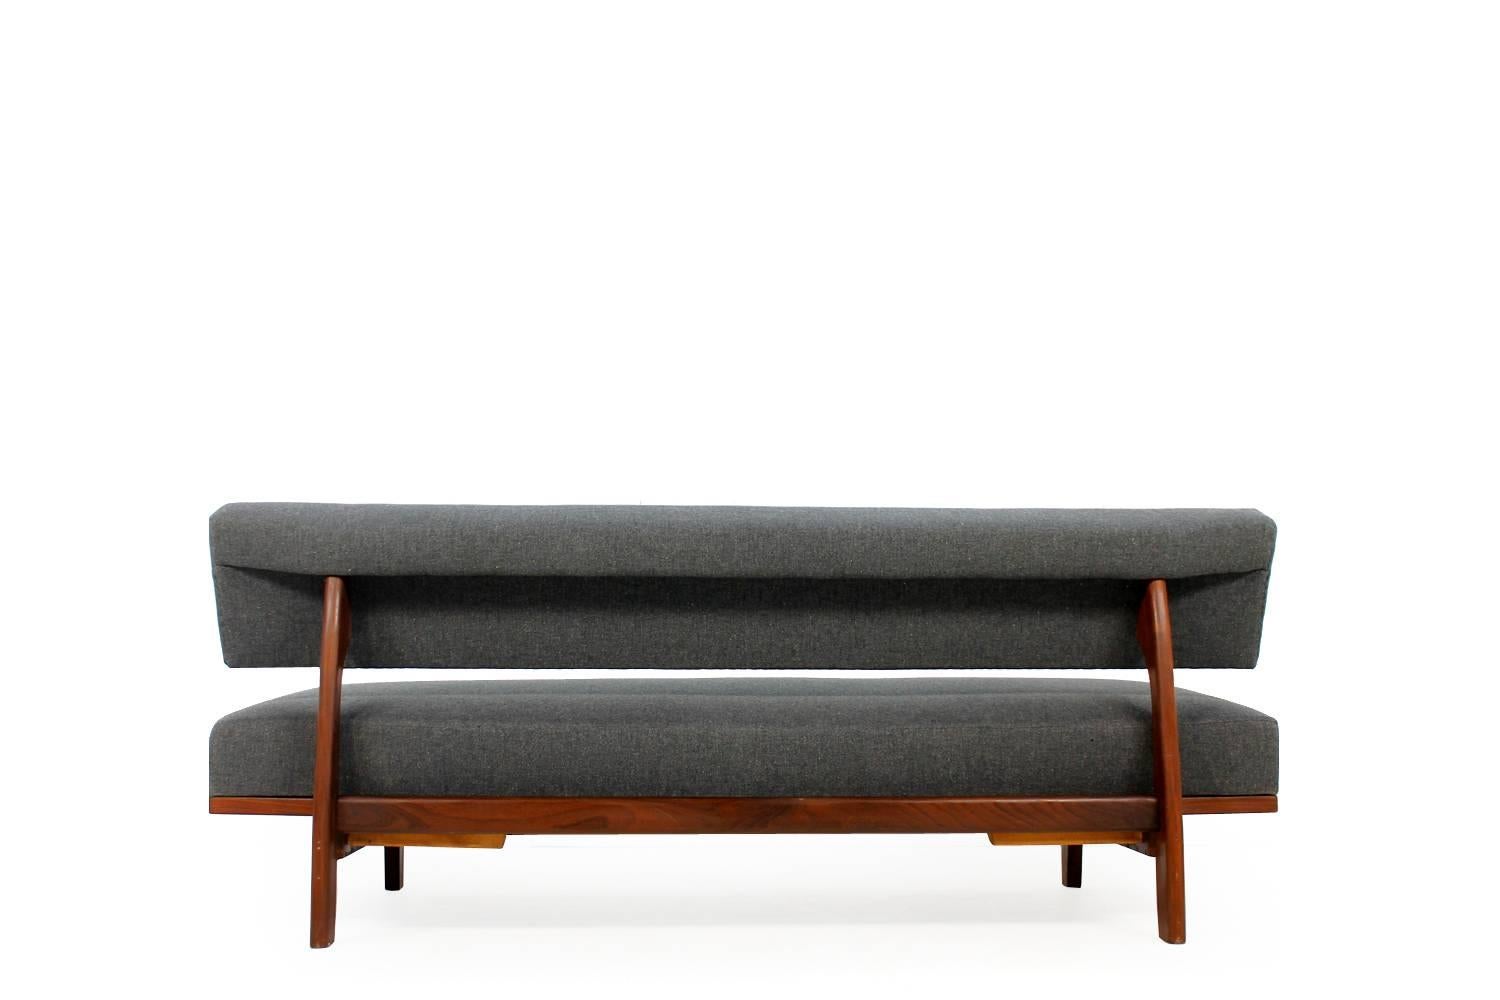 Mid-20th Century Extendable 1960s Daybed by Hans Bellmann Mod. 470 for Wilkhahn Germany Teak Sofa